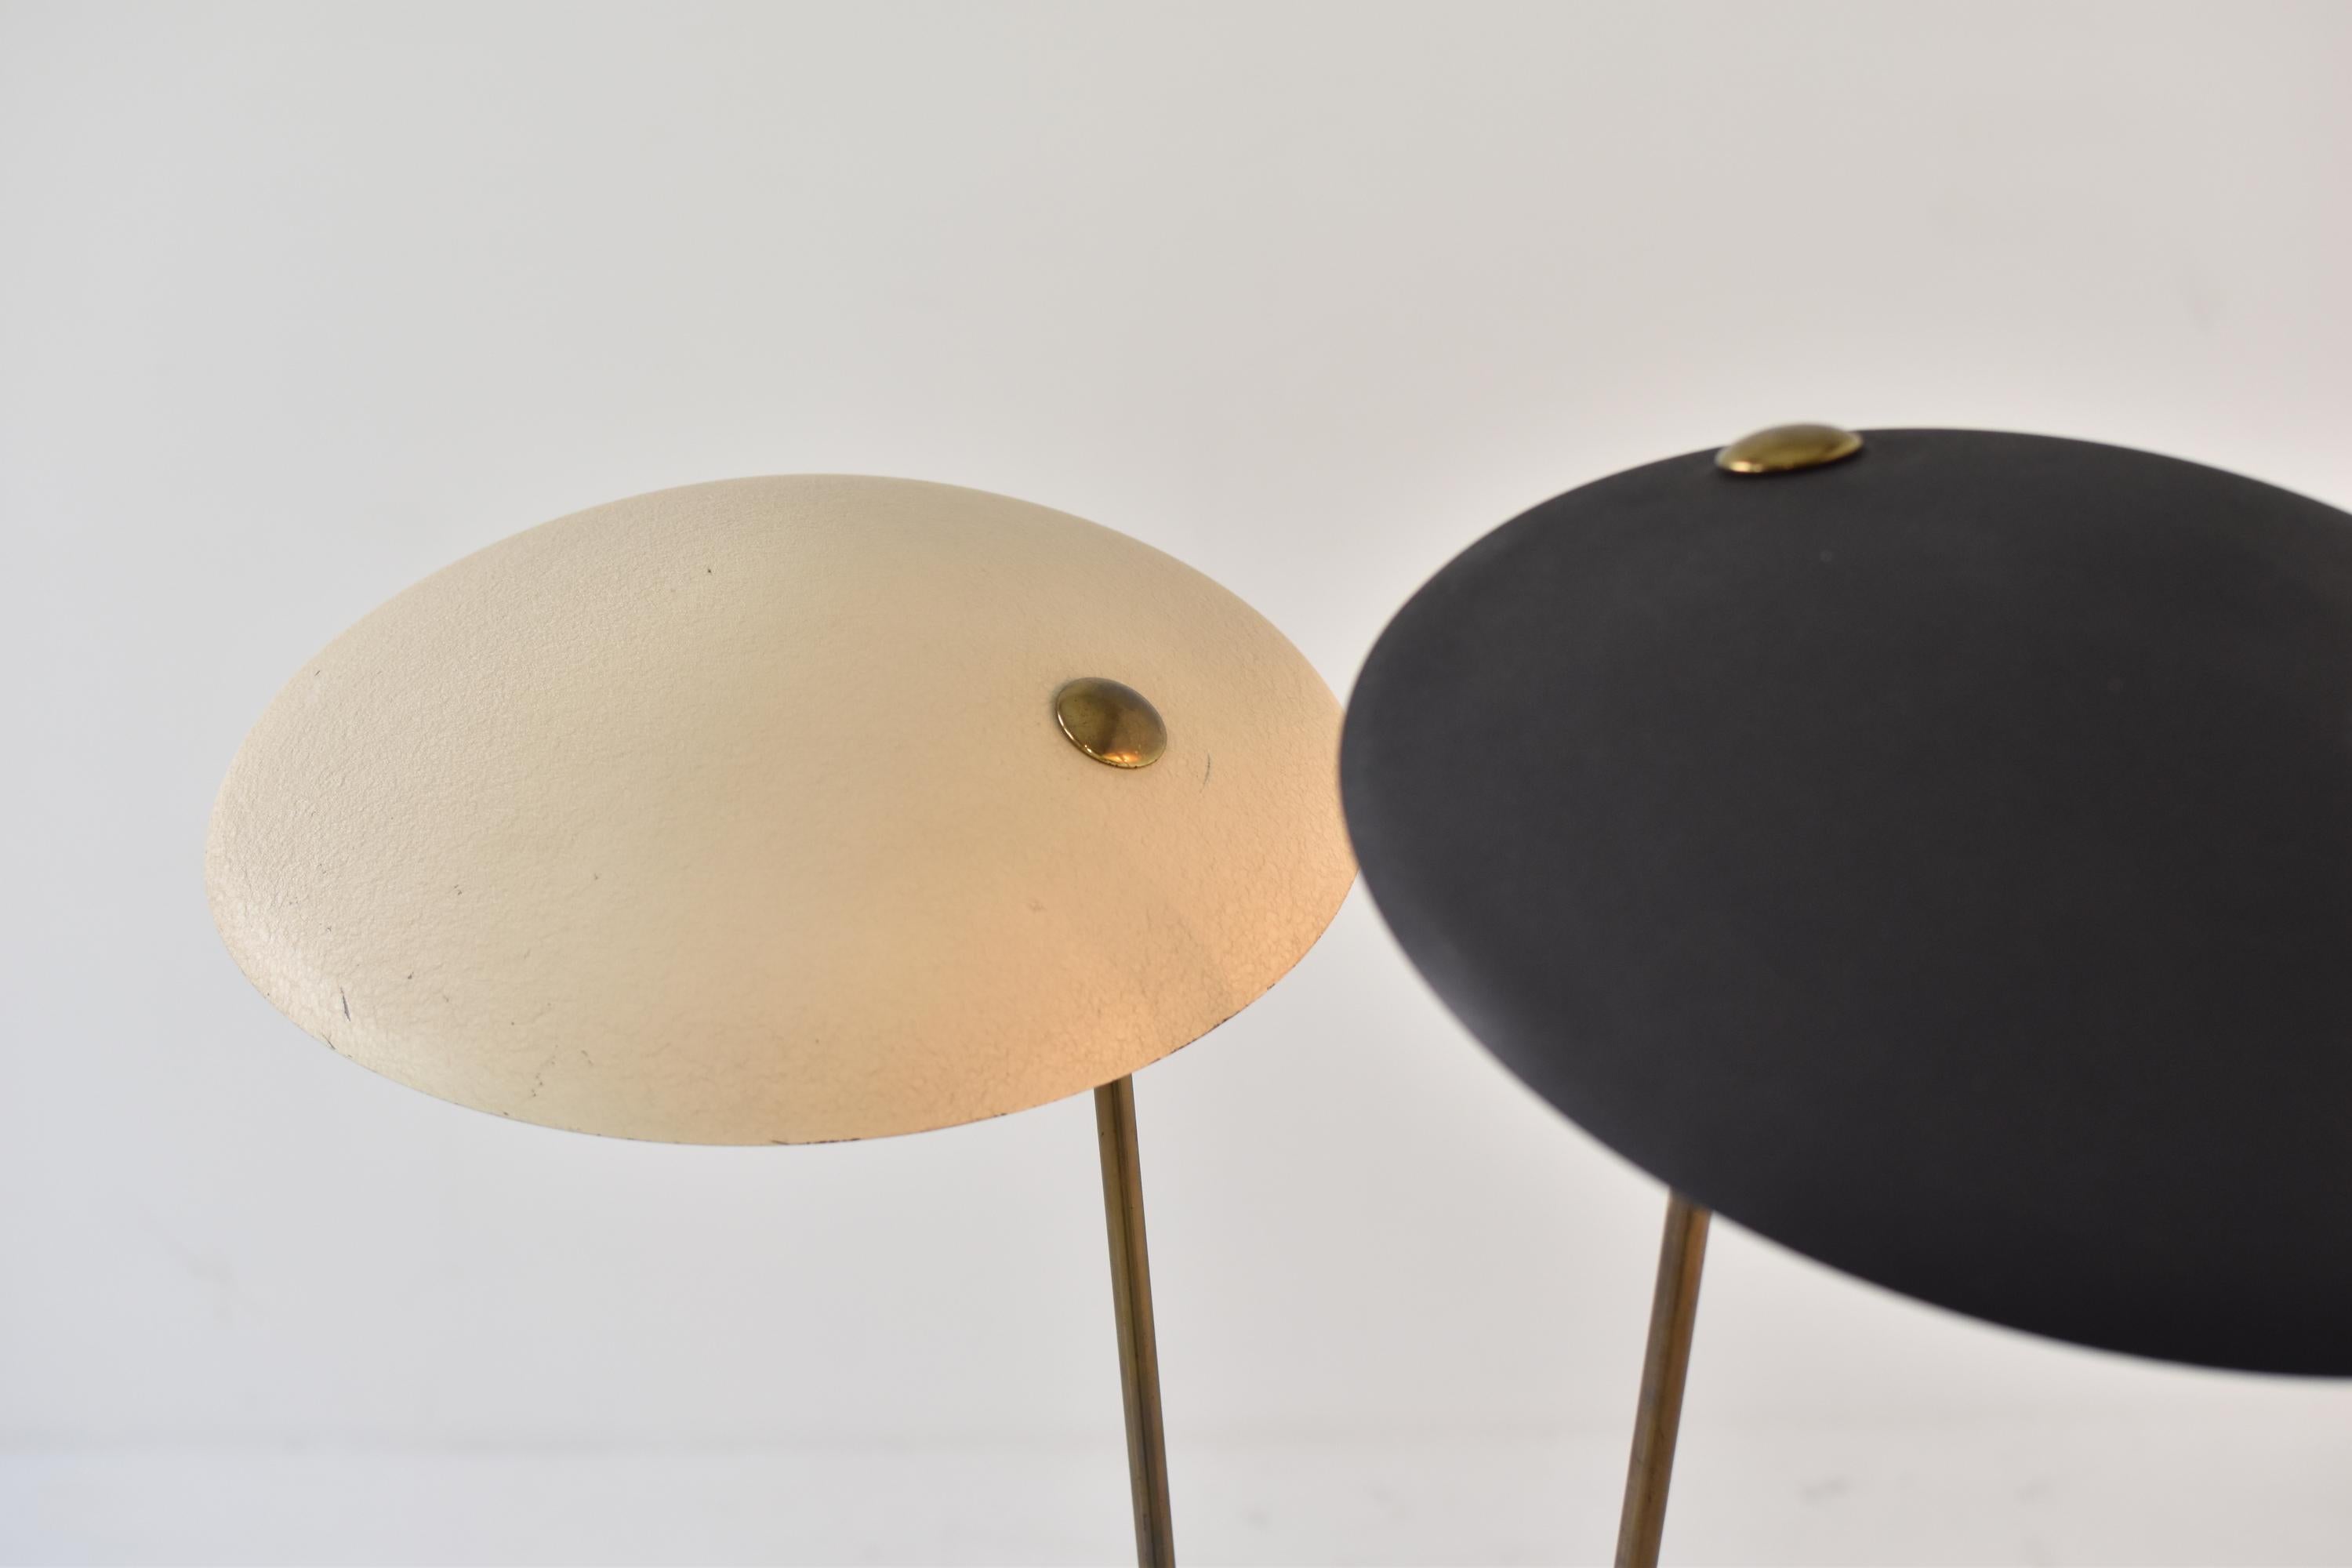 Metal Exceptional Floor Lamp from Italy, Attri Stilnovo 1960s